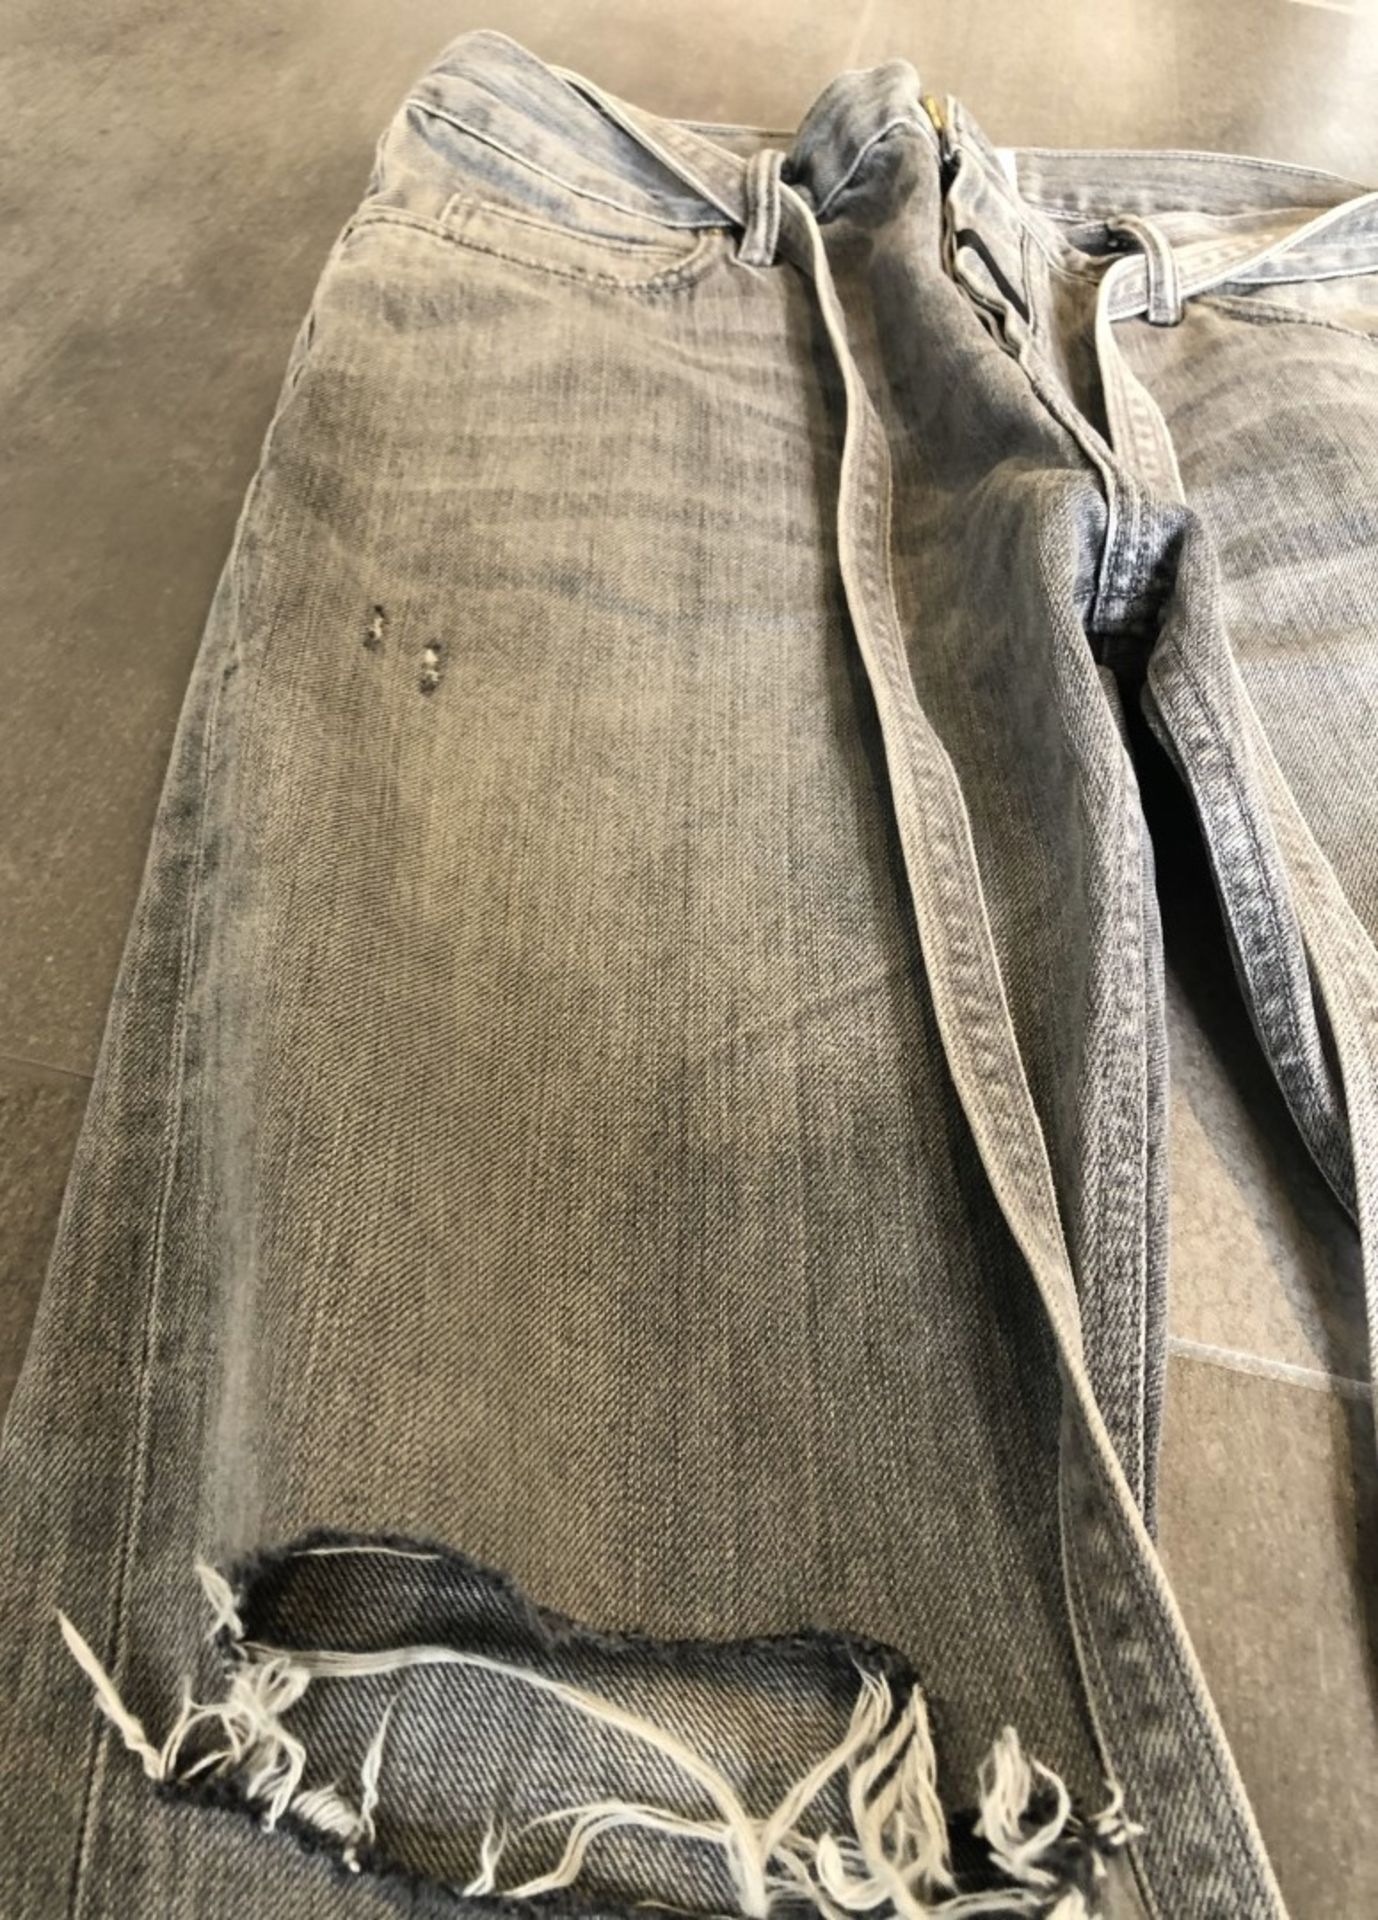 1 x Pair Of Men's Genuine Fear Of God Jeans - Grey With Rips - Size (EU/UK): 32/33/32/33 - - Image 2 of 7